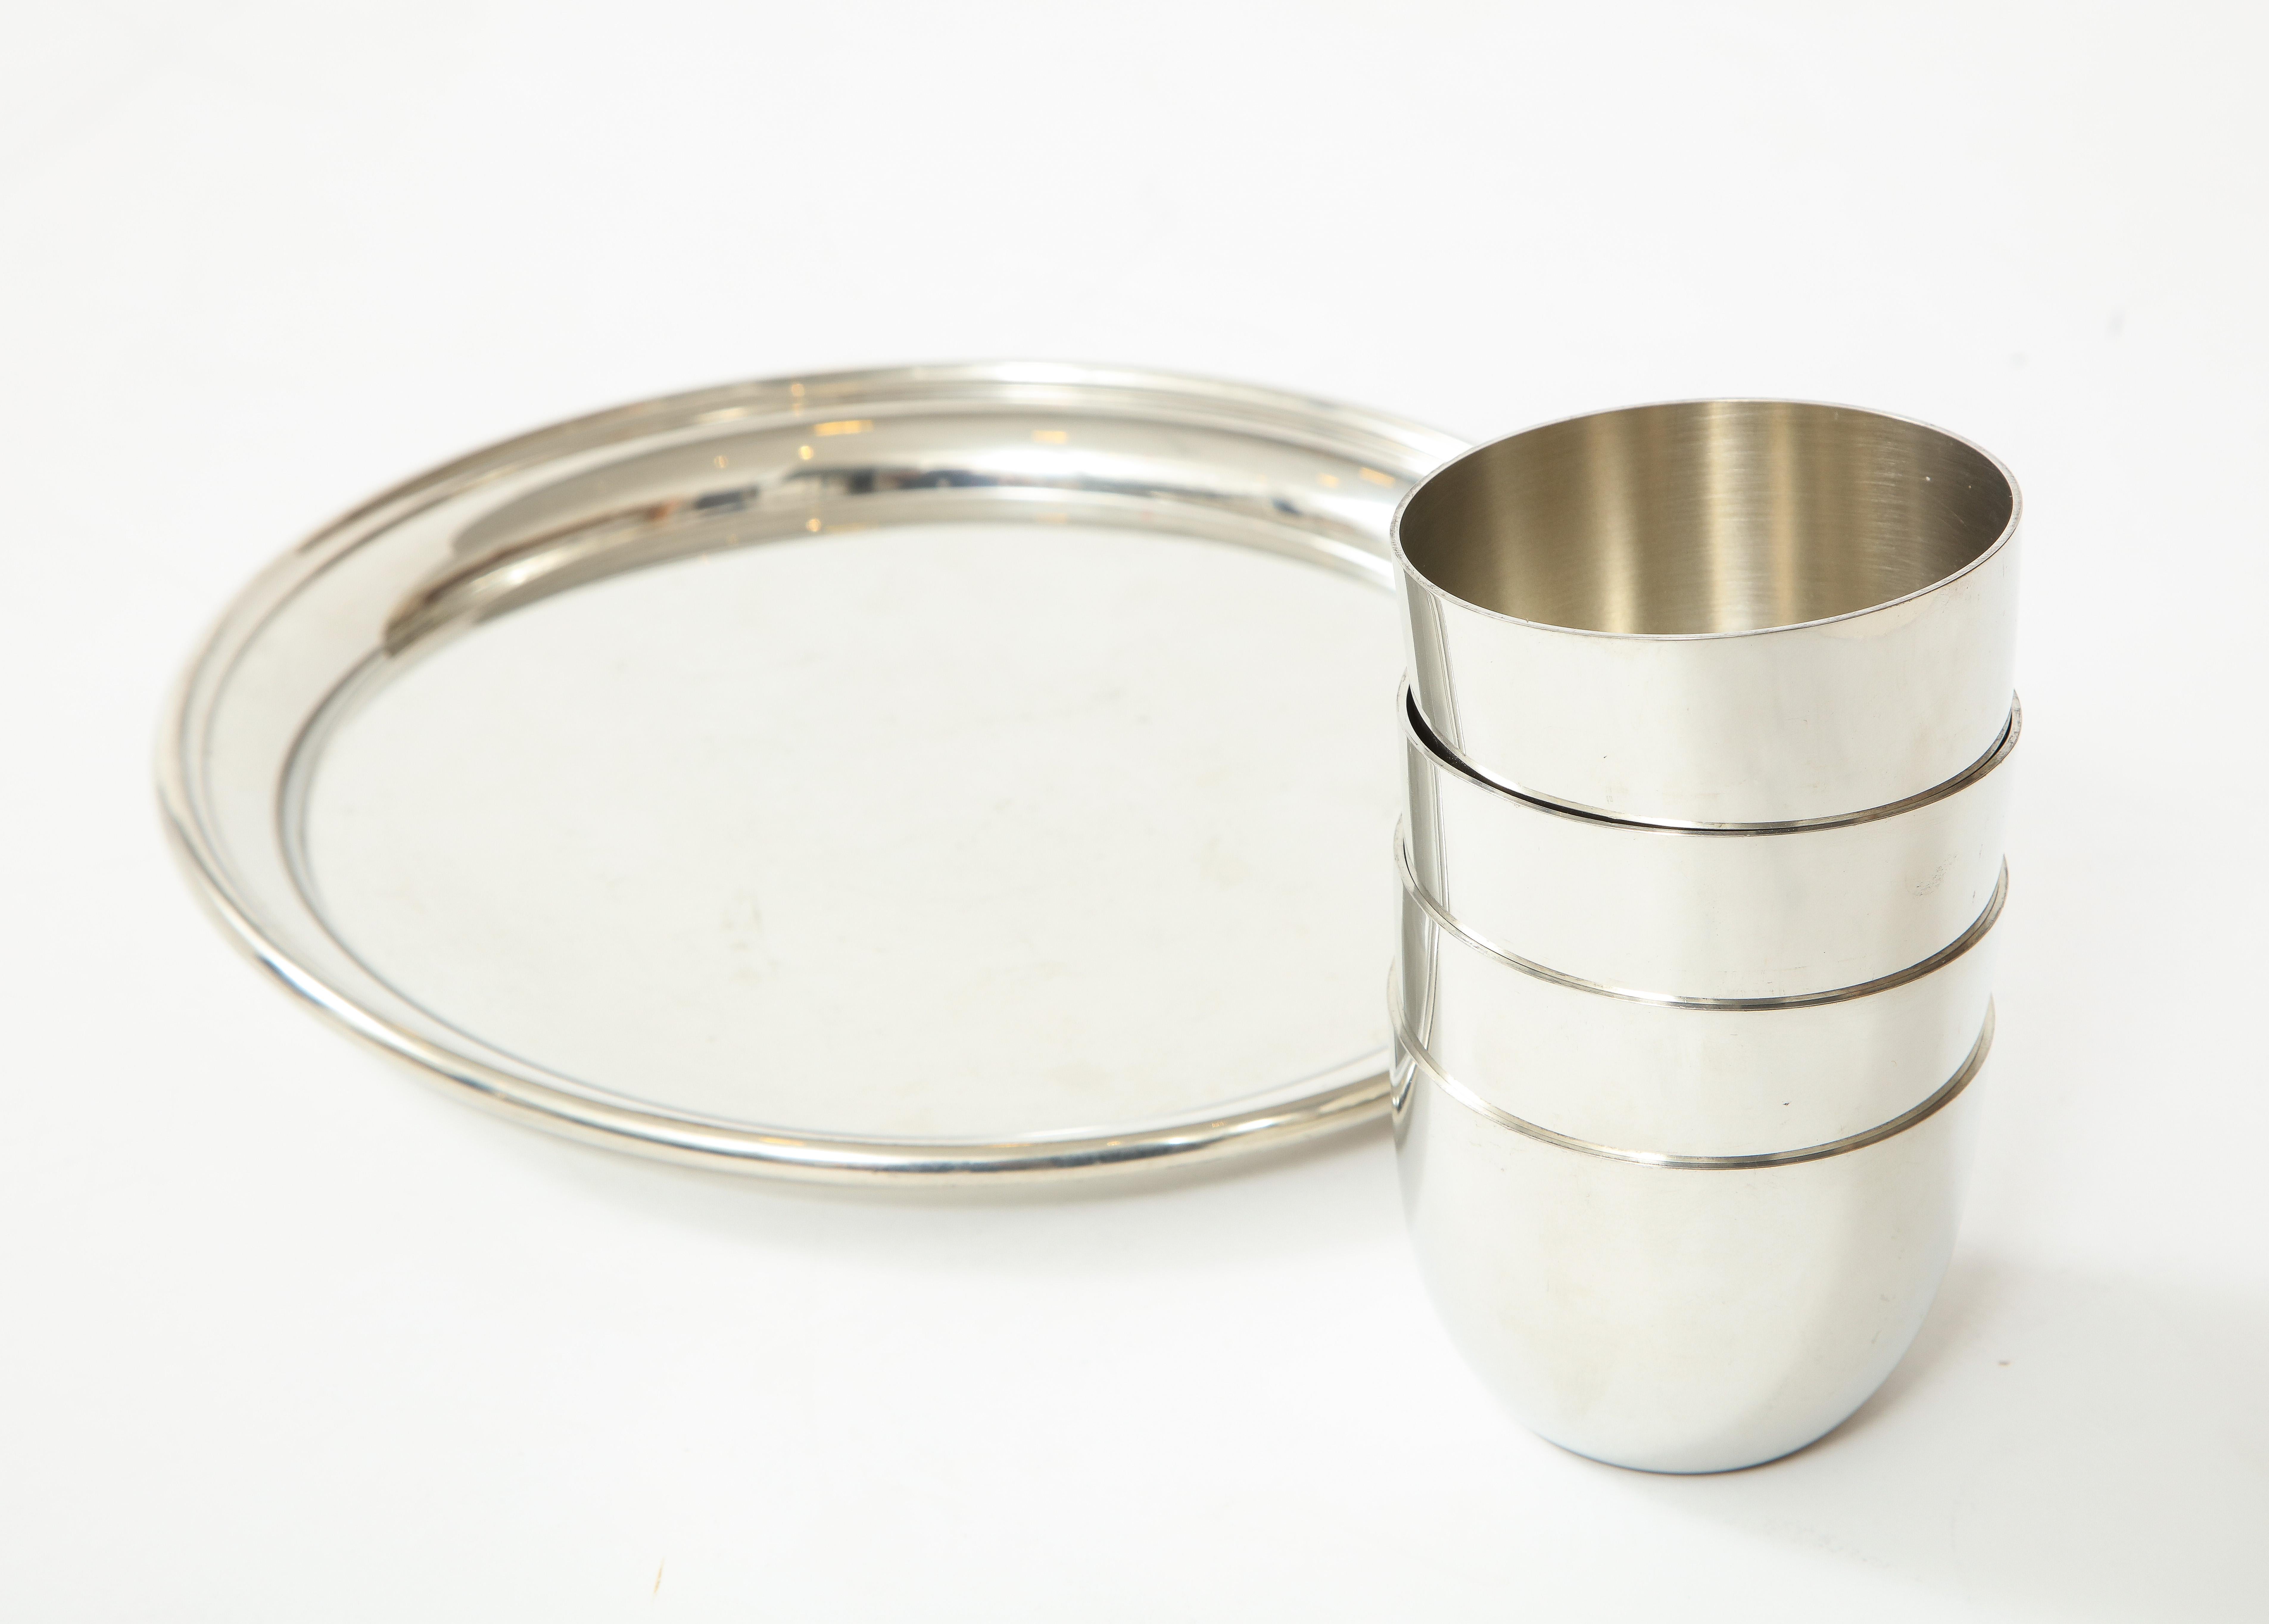 American Set of 4 Preisner Pewter Beverage Cups and Tray For Sale